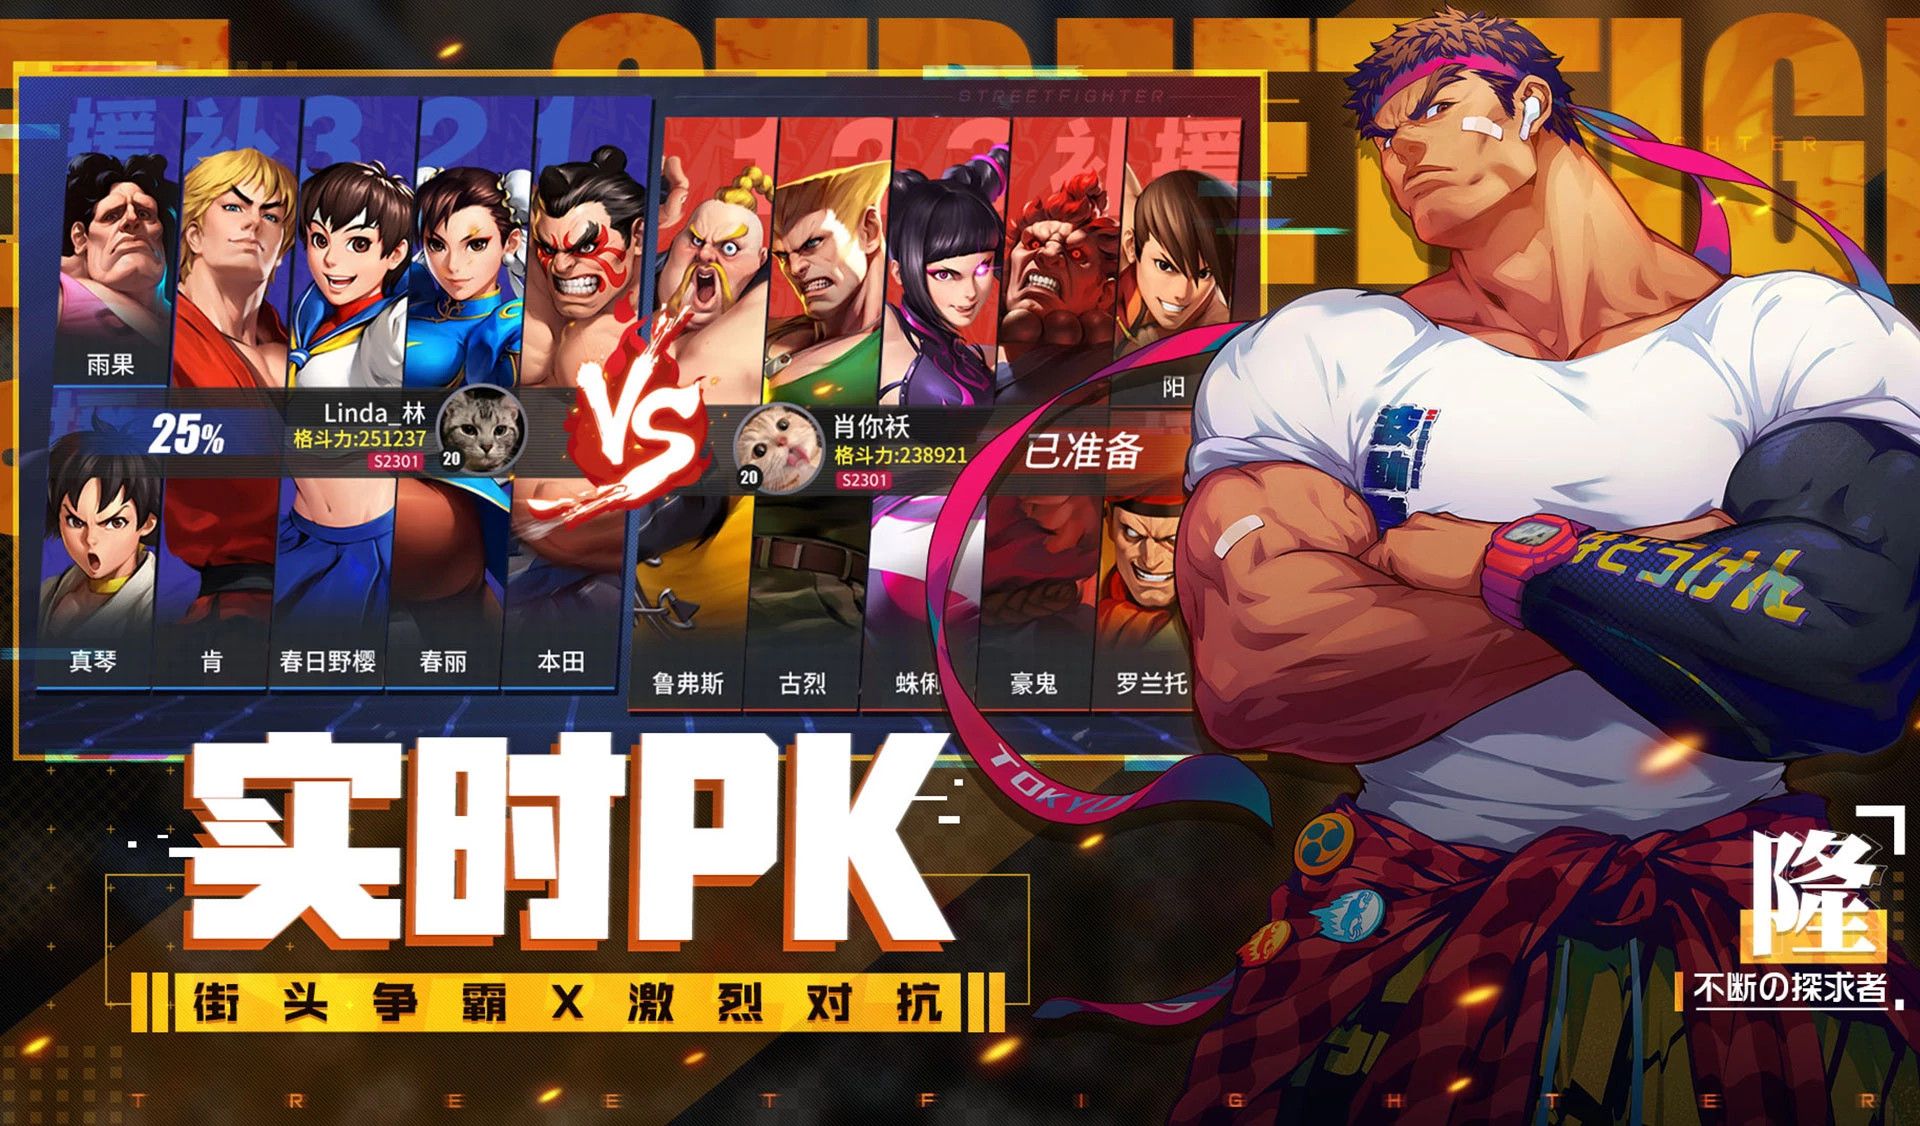 Street Fighter: Duel - Tencent Games launches new mobile title based on  popular Capcom IP - MMO Culture